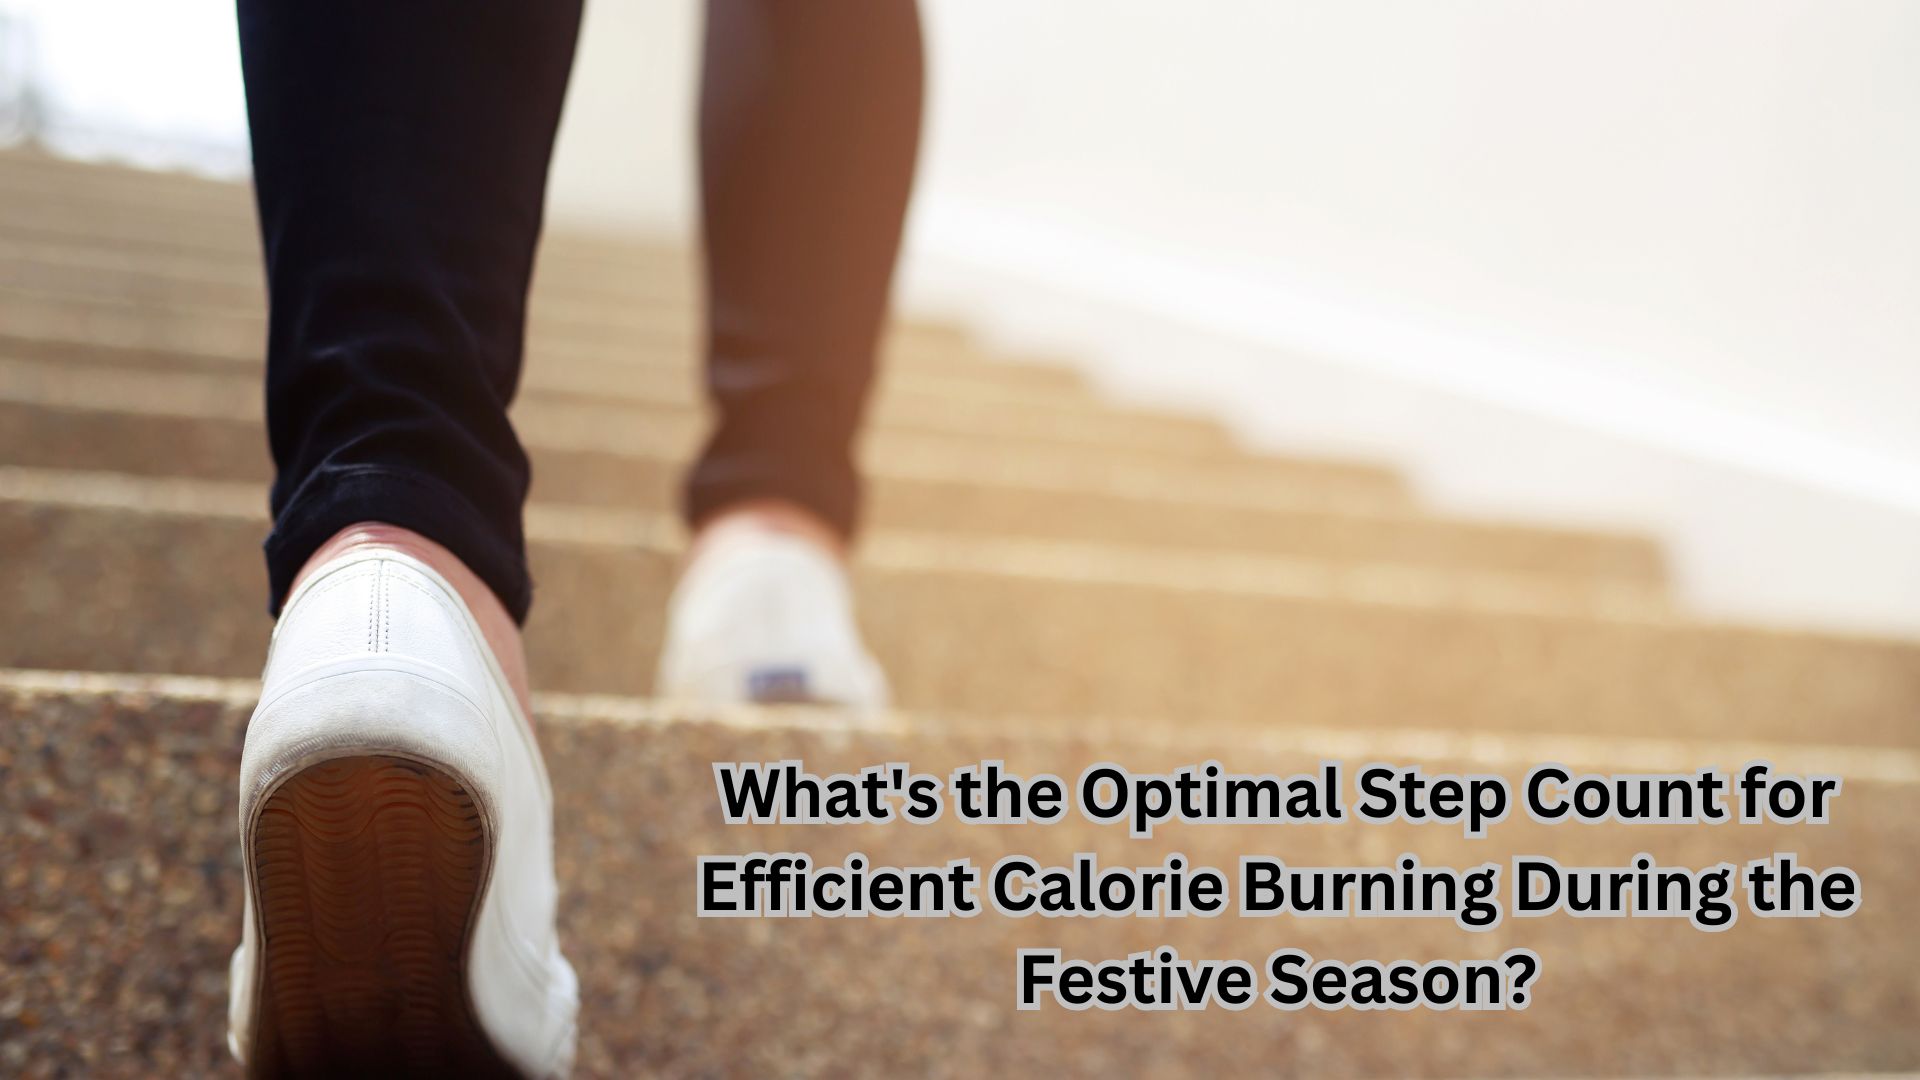 What's the Optimal Step Count for Efficient Calorie Burning During the Festive Season?